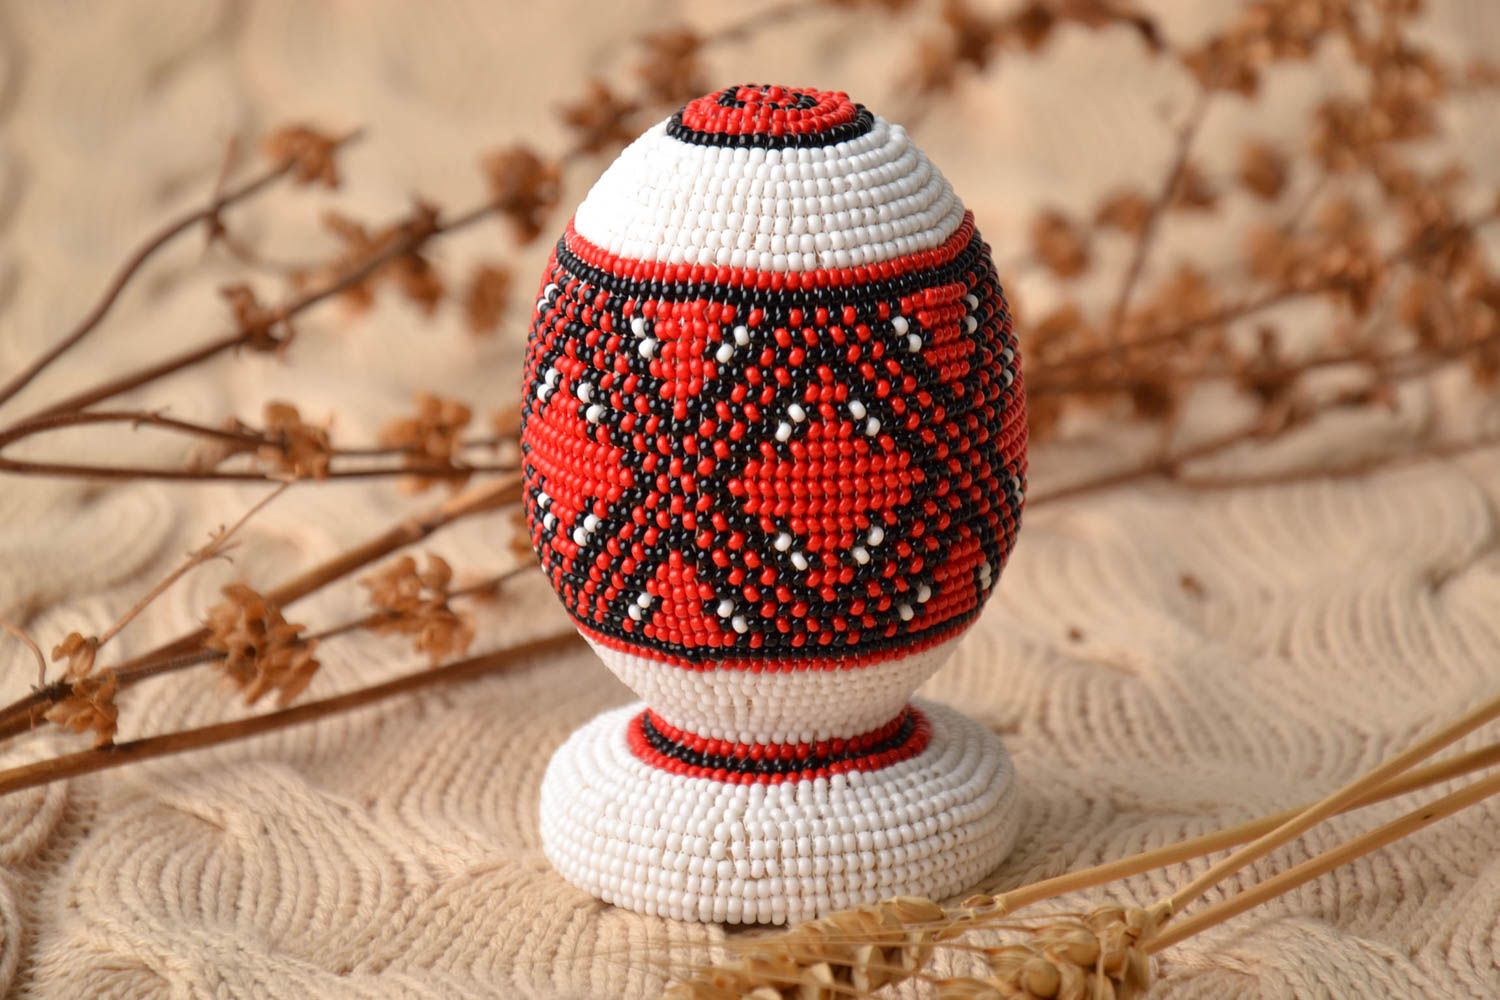 Wooden egg woven over with beads photo 1